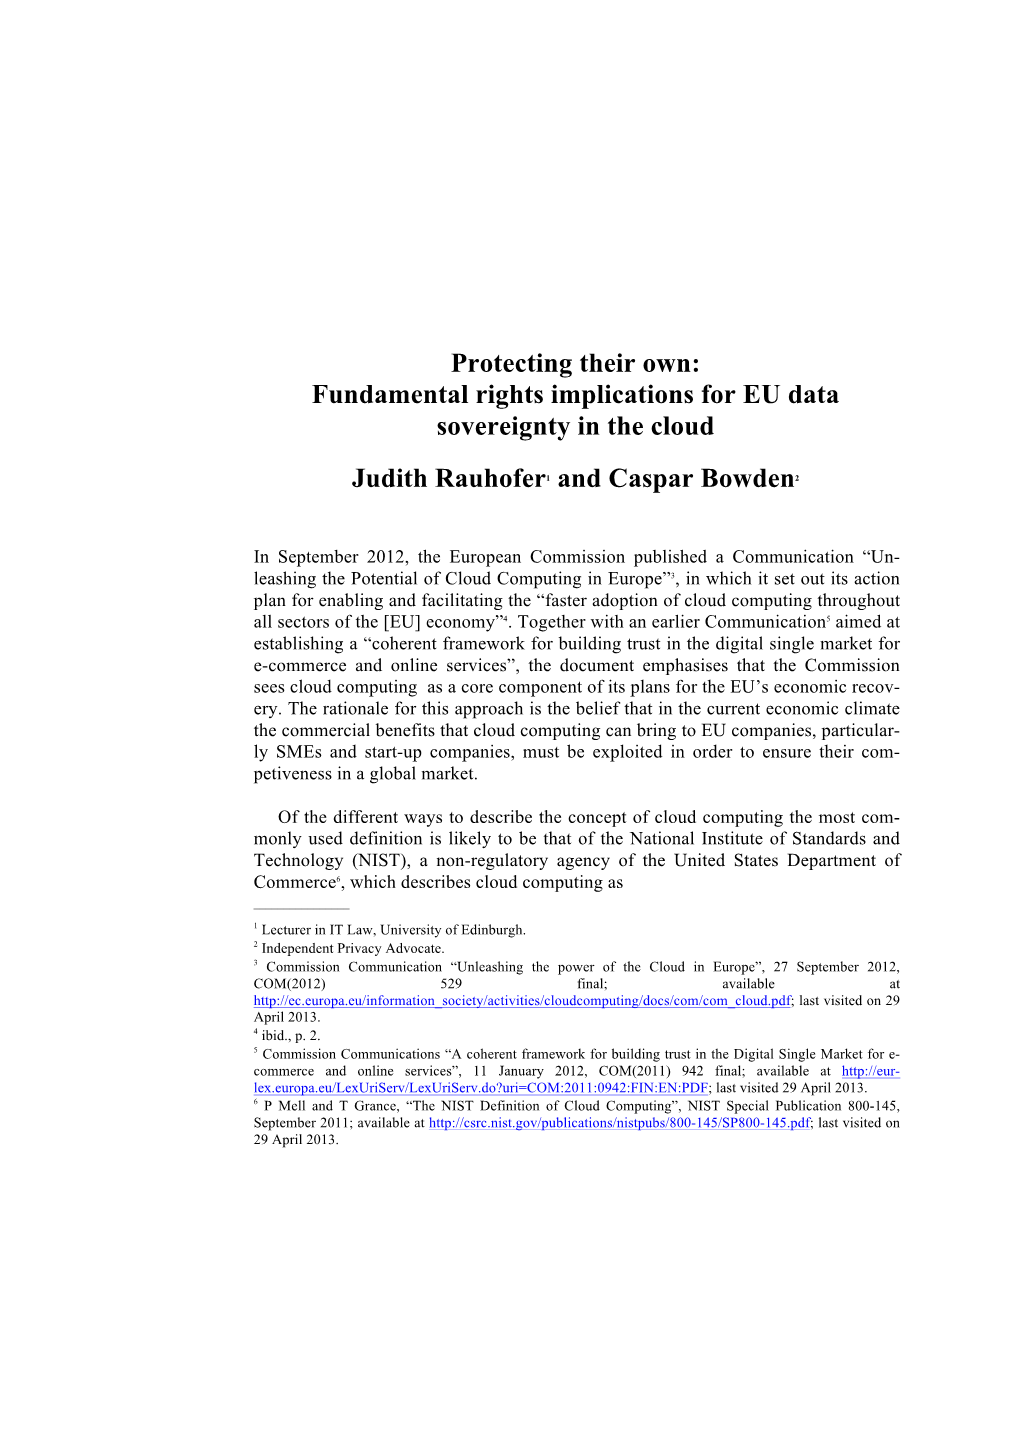 Protecting Their Own: Fundamental Rights Implications for EU Data Sovereignty in the Cloud Judith Rauhofer1 and Caspar Bowden2